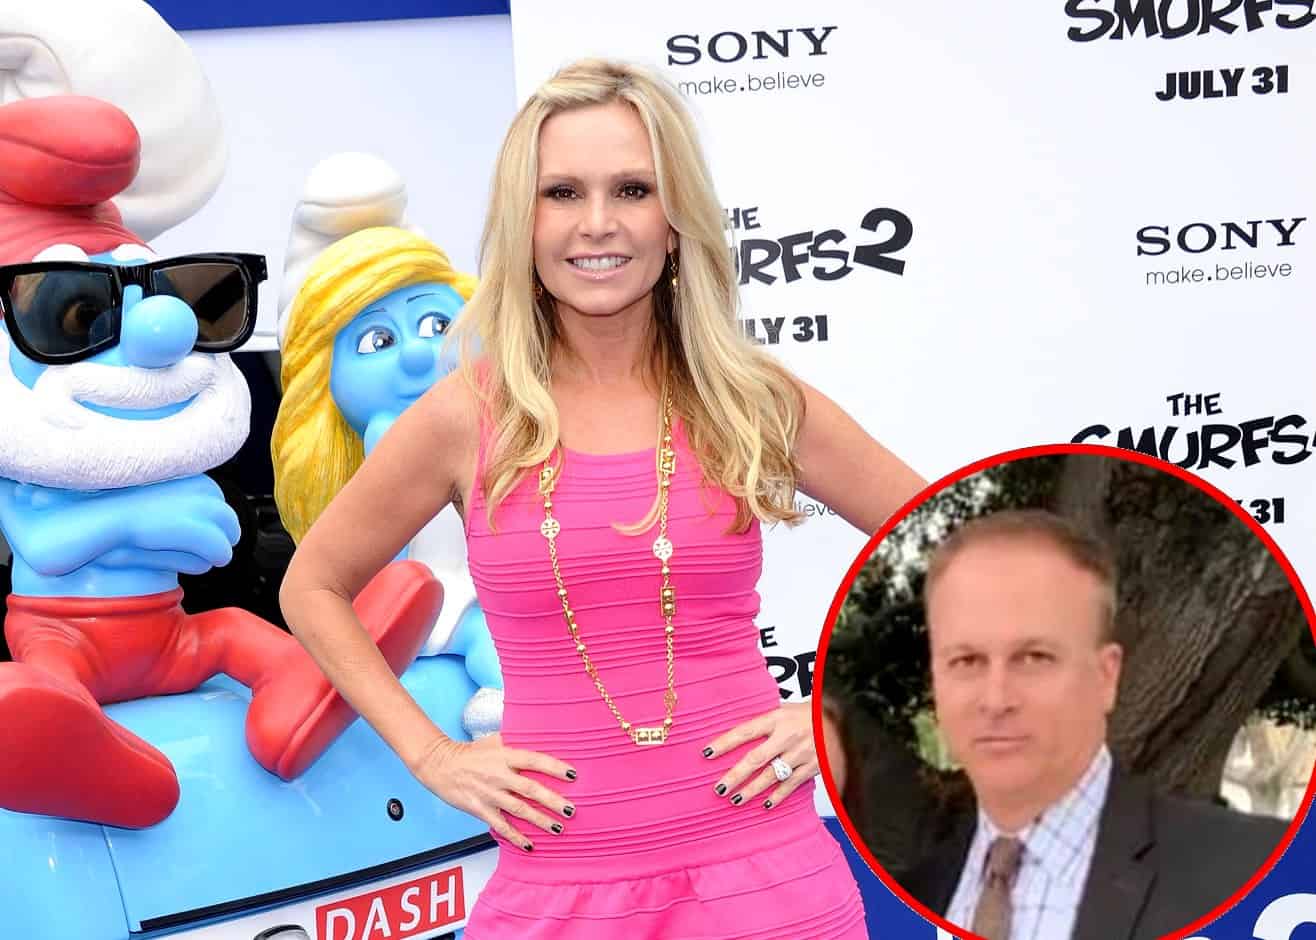 Tamra Judge Says Her RHOC Exit Was Prompted by Ex Simon Barney's Cancer Diagnosis and Shares if She Has Plans to Return as Her RHOC Costars React to His Health Crisis